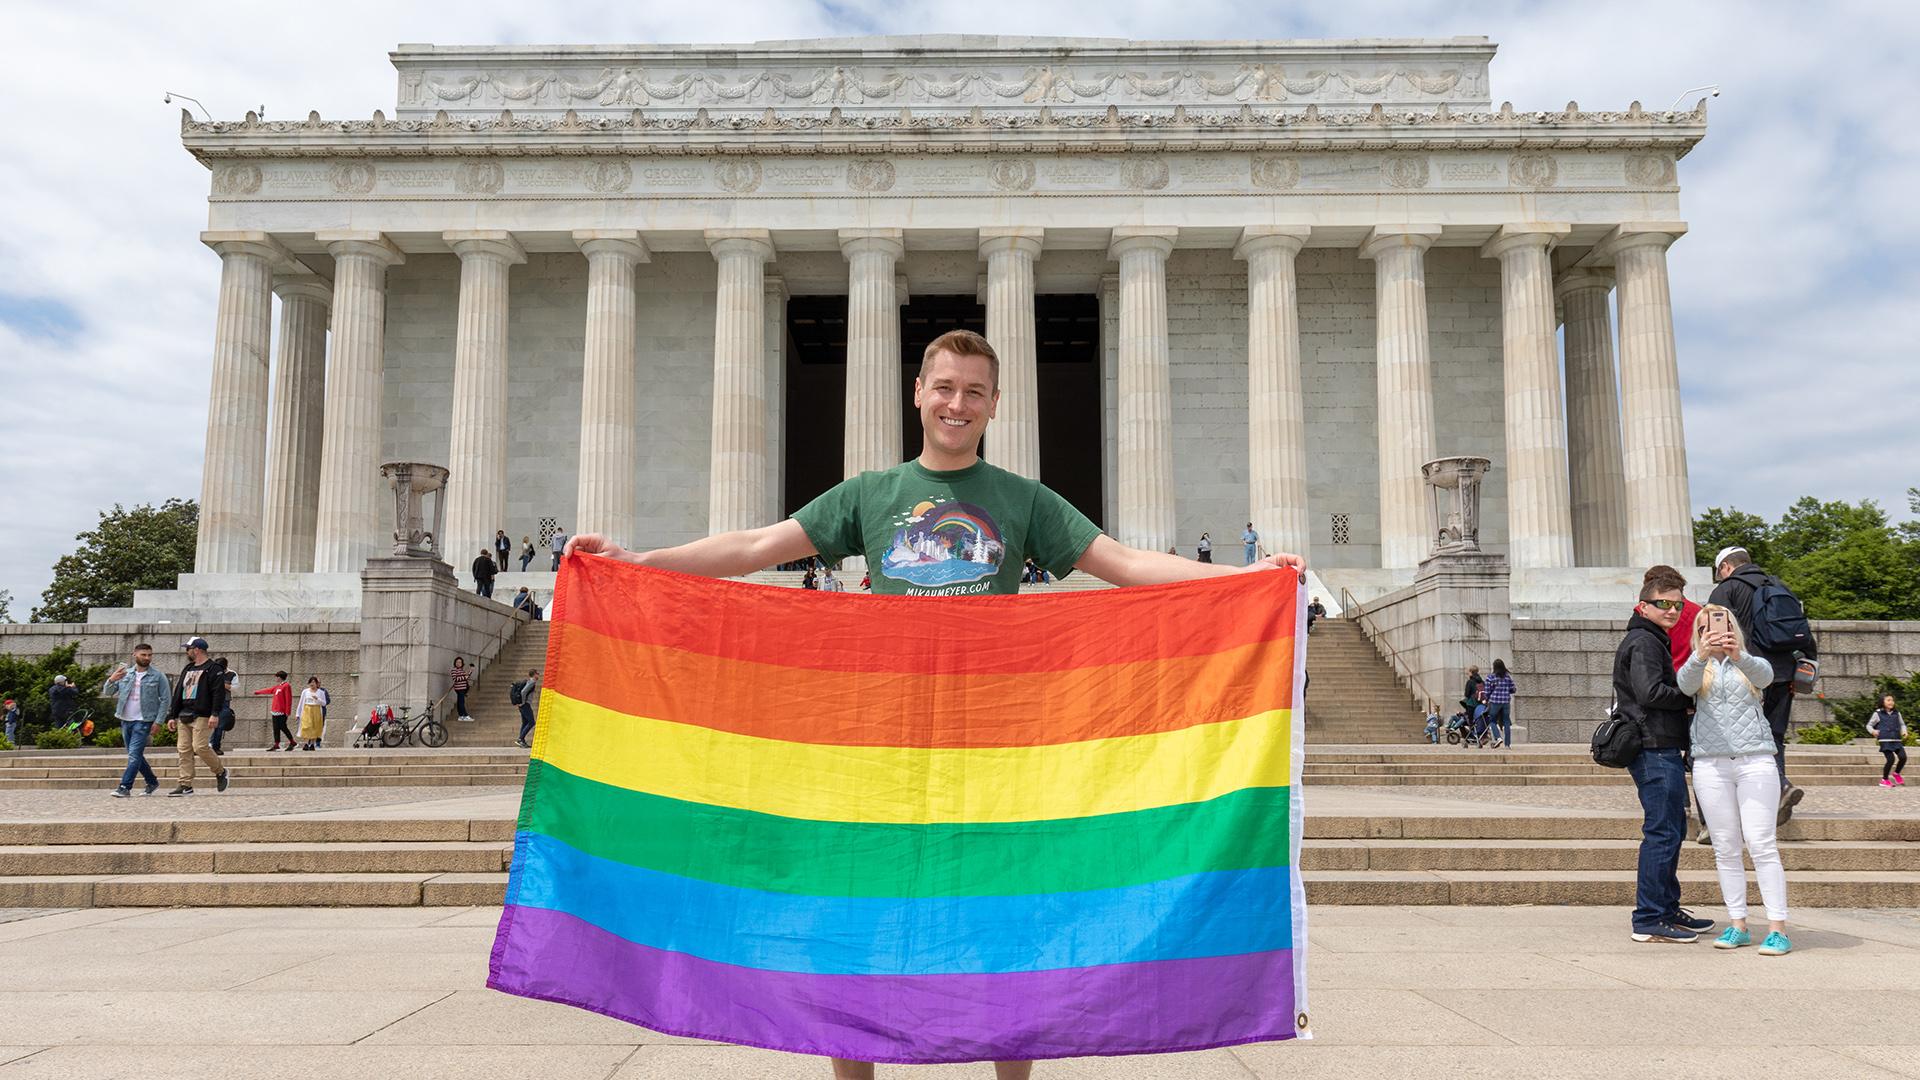 Mikah Meyer visits the Lincoln Memorial in Washington, D.C. on Monday, April 29, 2019. The national park site was his final stop on a three-year journey visiting all 419 national park sites. (Courtesy of Mikah Meyer)